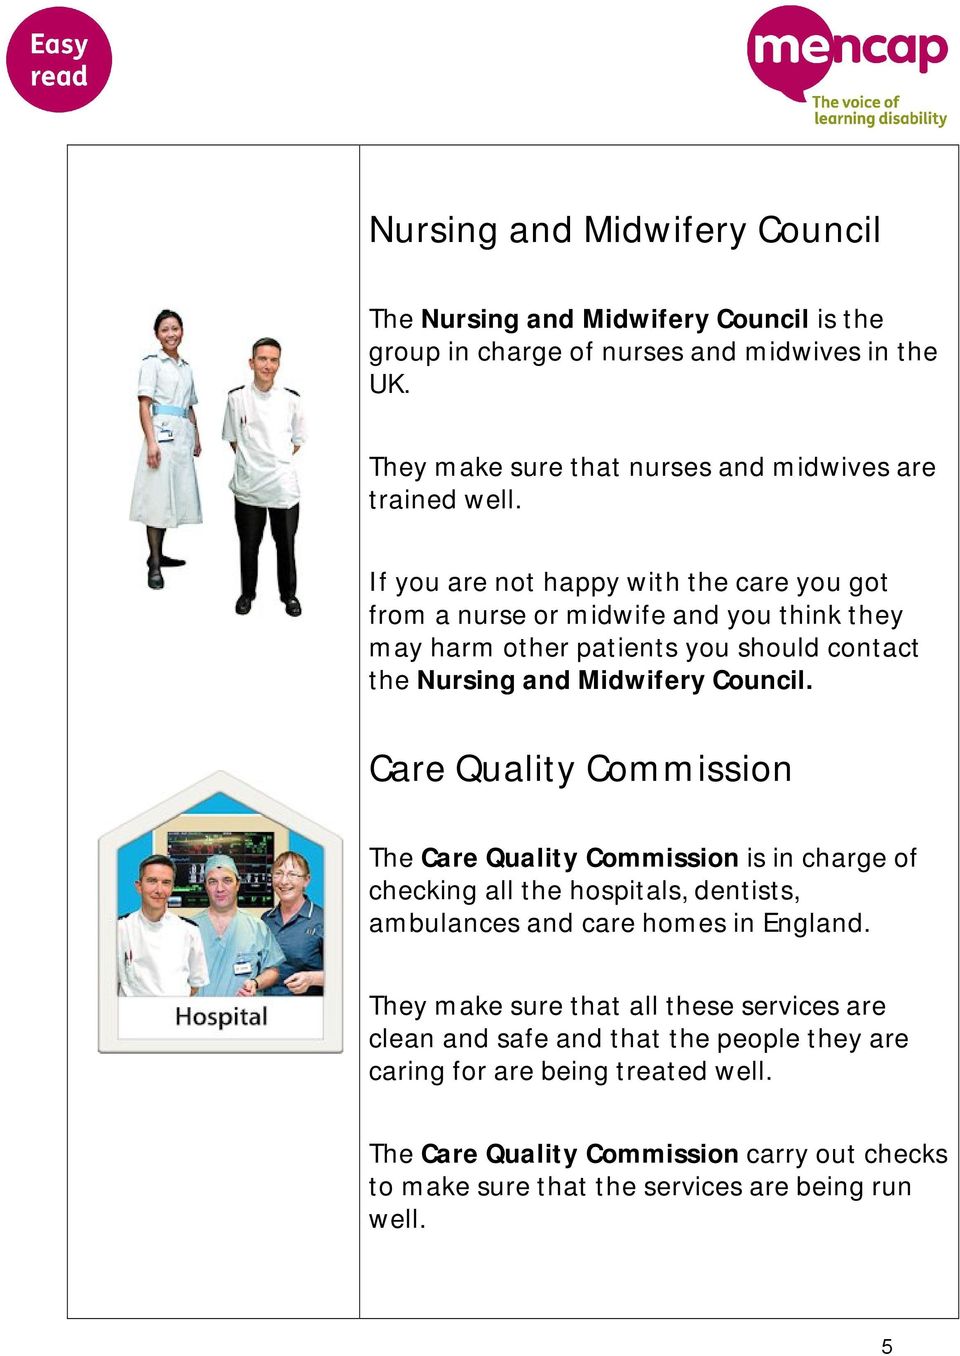 from a nurse or midwife and you think they may harm other patients you should contact the Nursing and Midwifery Council.